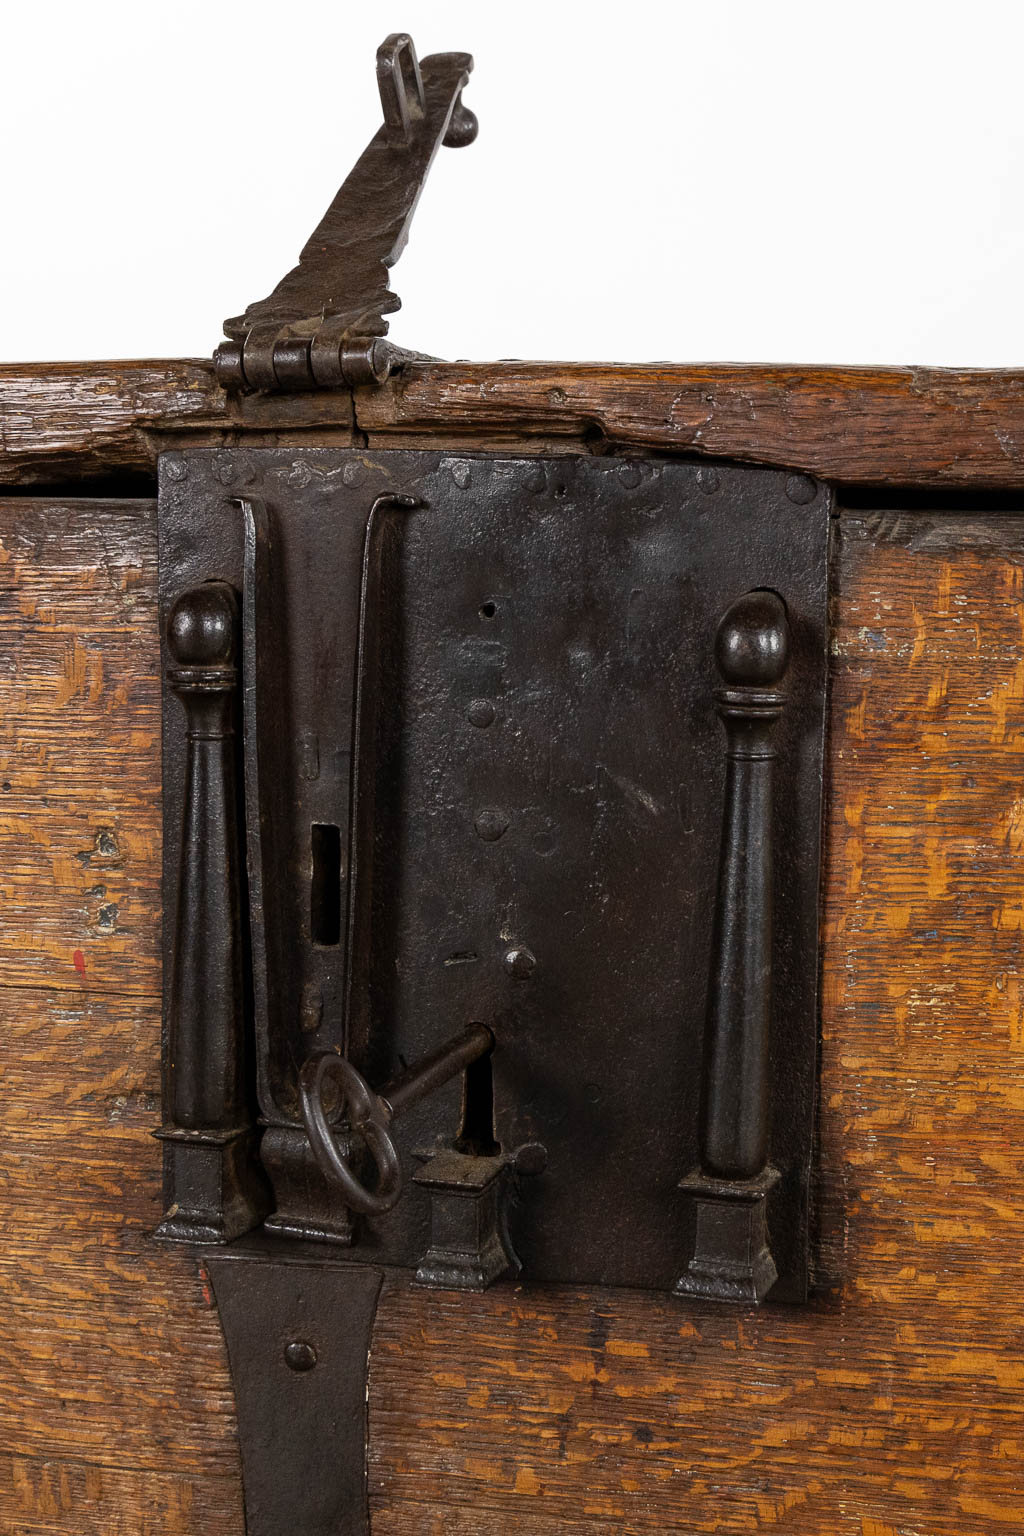 An antique Money box, wood mounted with wrought iron, circa 1500. (L:77 x W:44 x H:50 cm) - Image 10 of 14